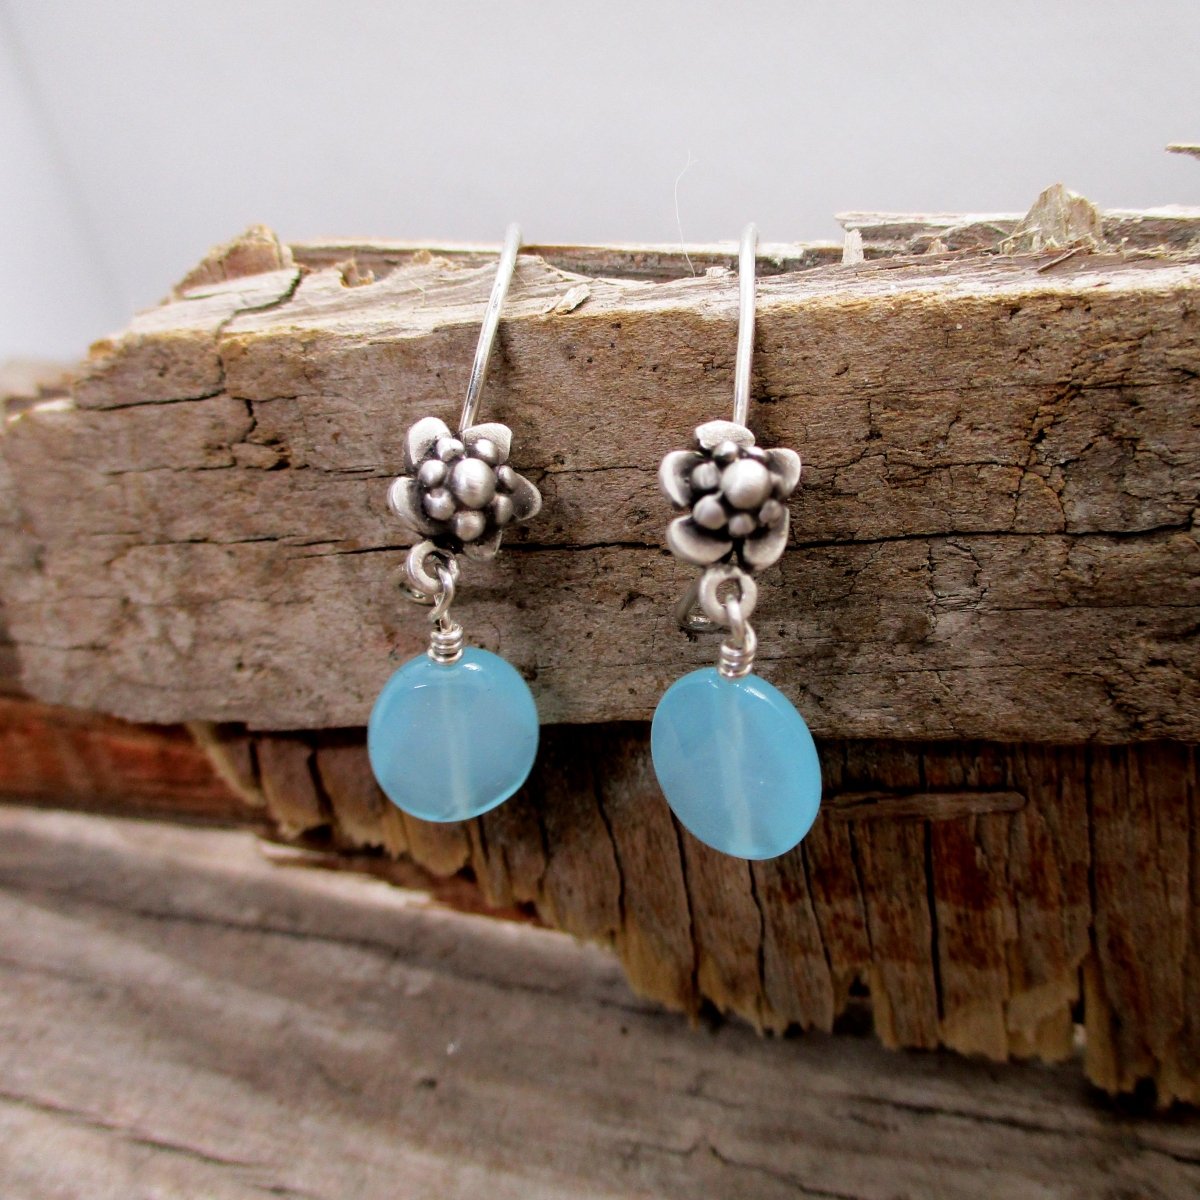 MAID Mini Flower and Turquoise Quartz Earrings - Luxe Design Jewellery